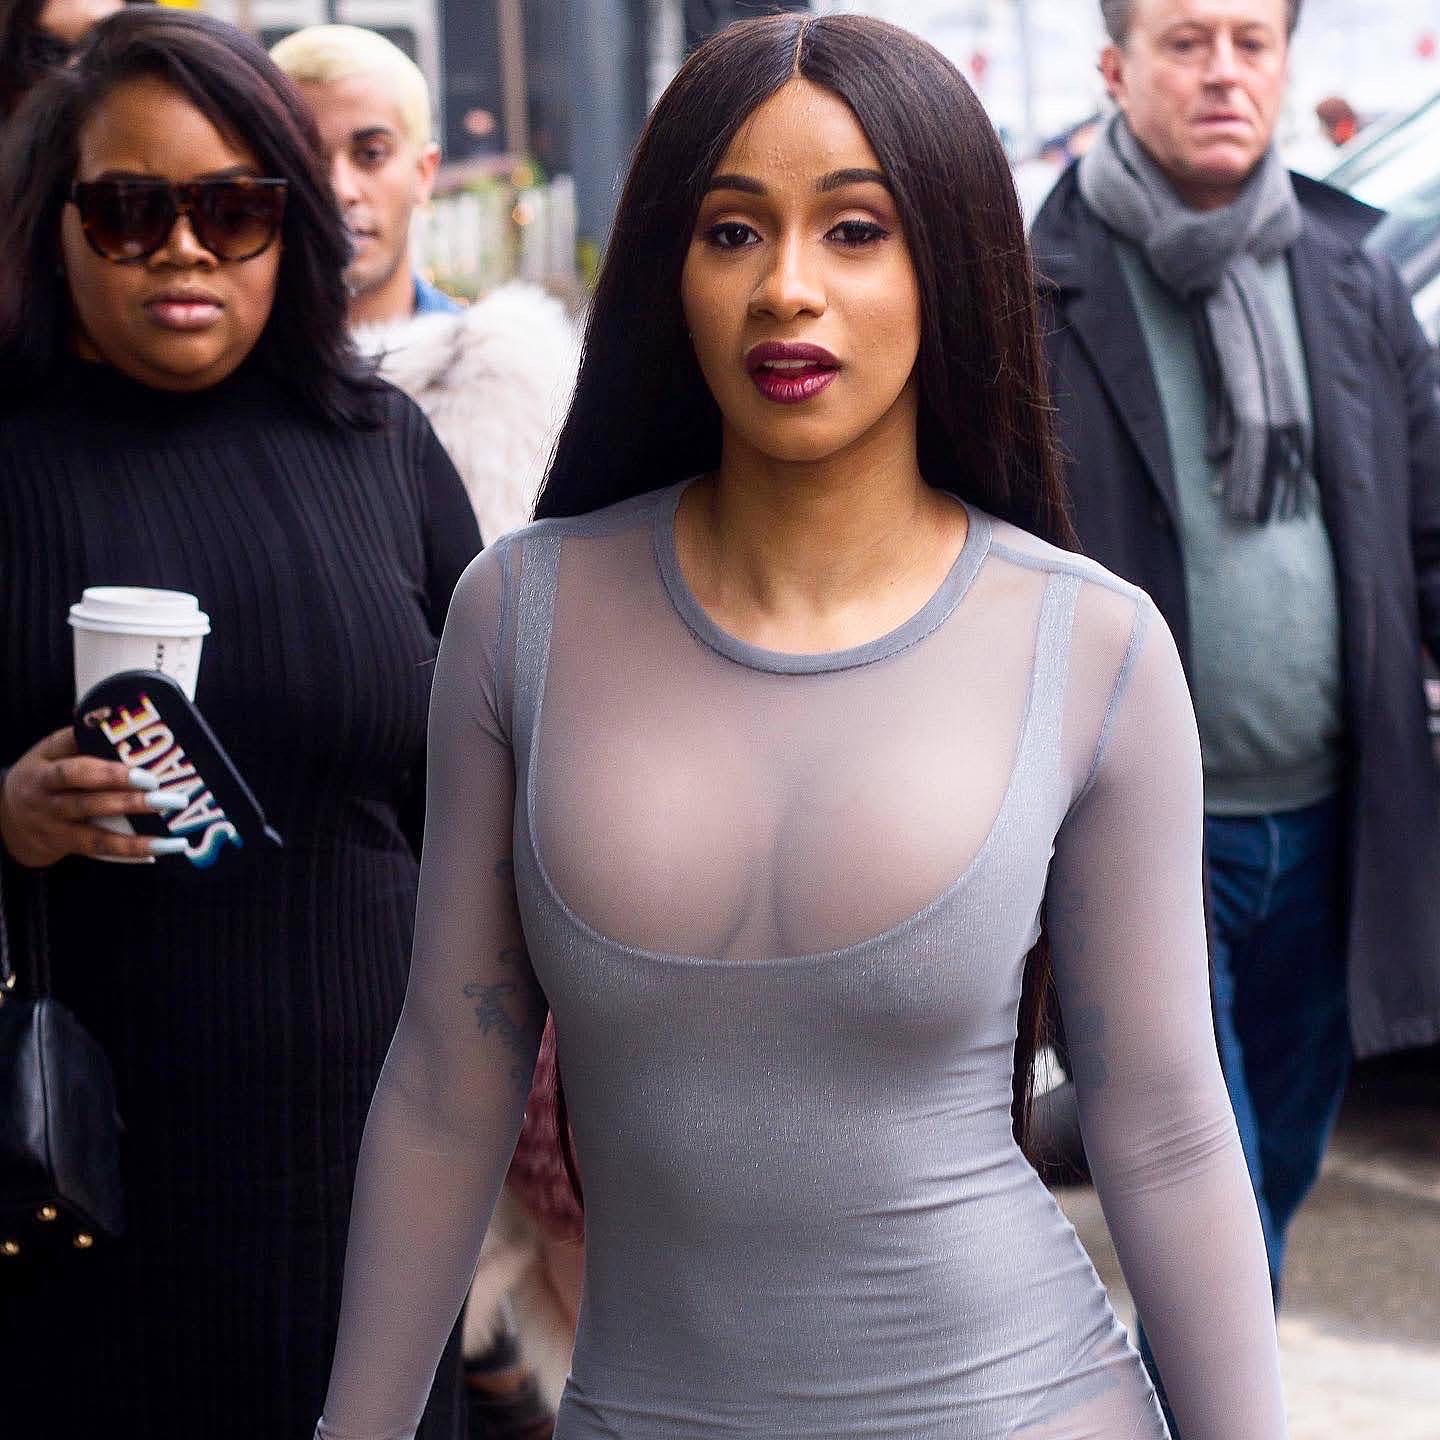 Cardi B Reveals On Twitter How Much Spends On COVID-19 Testing